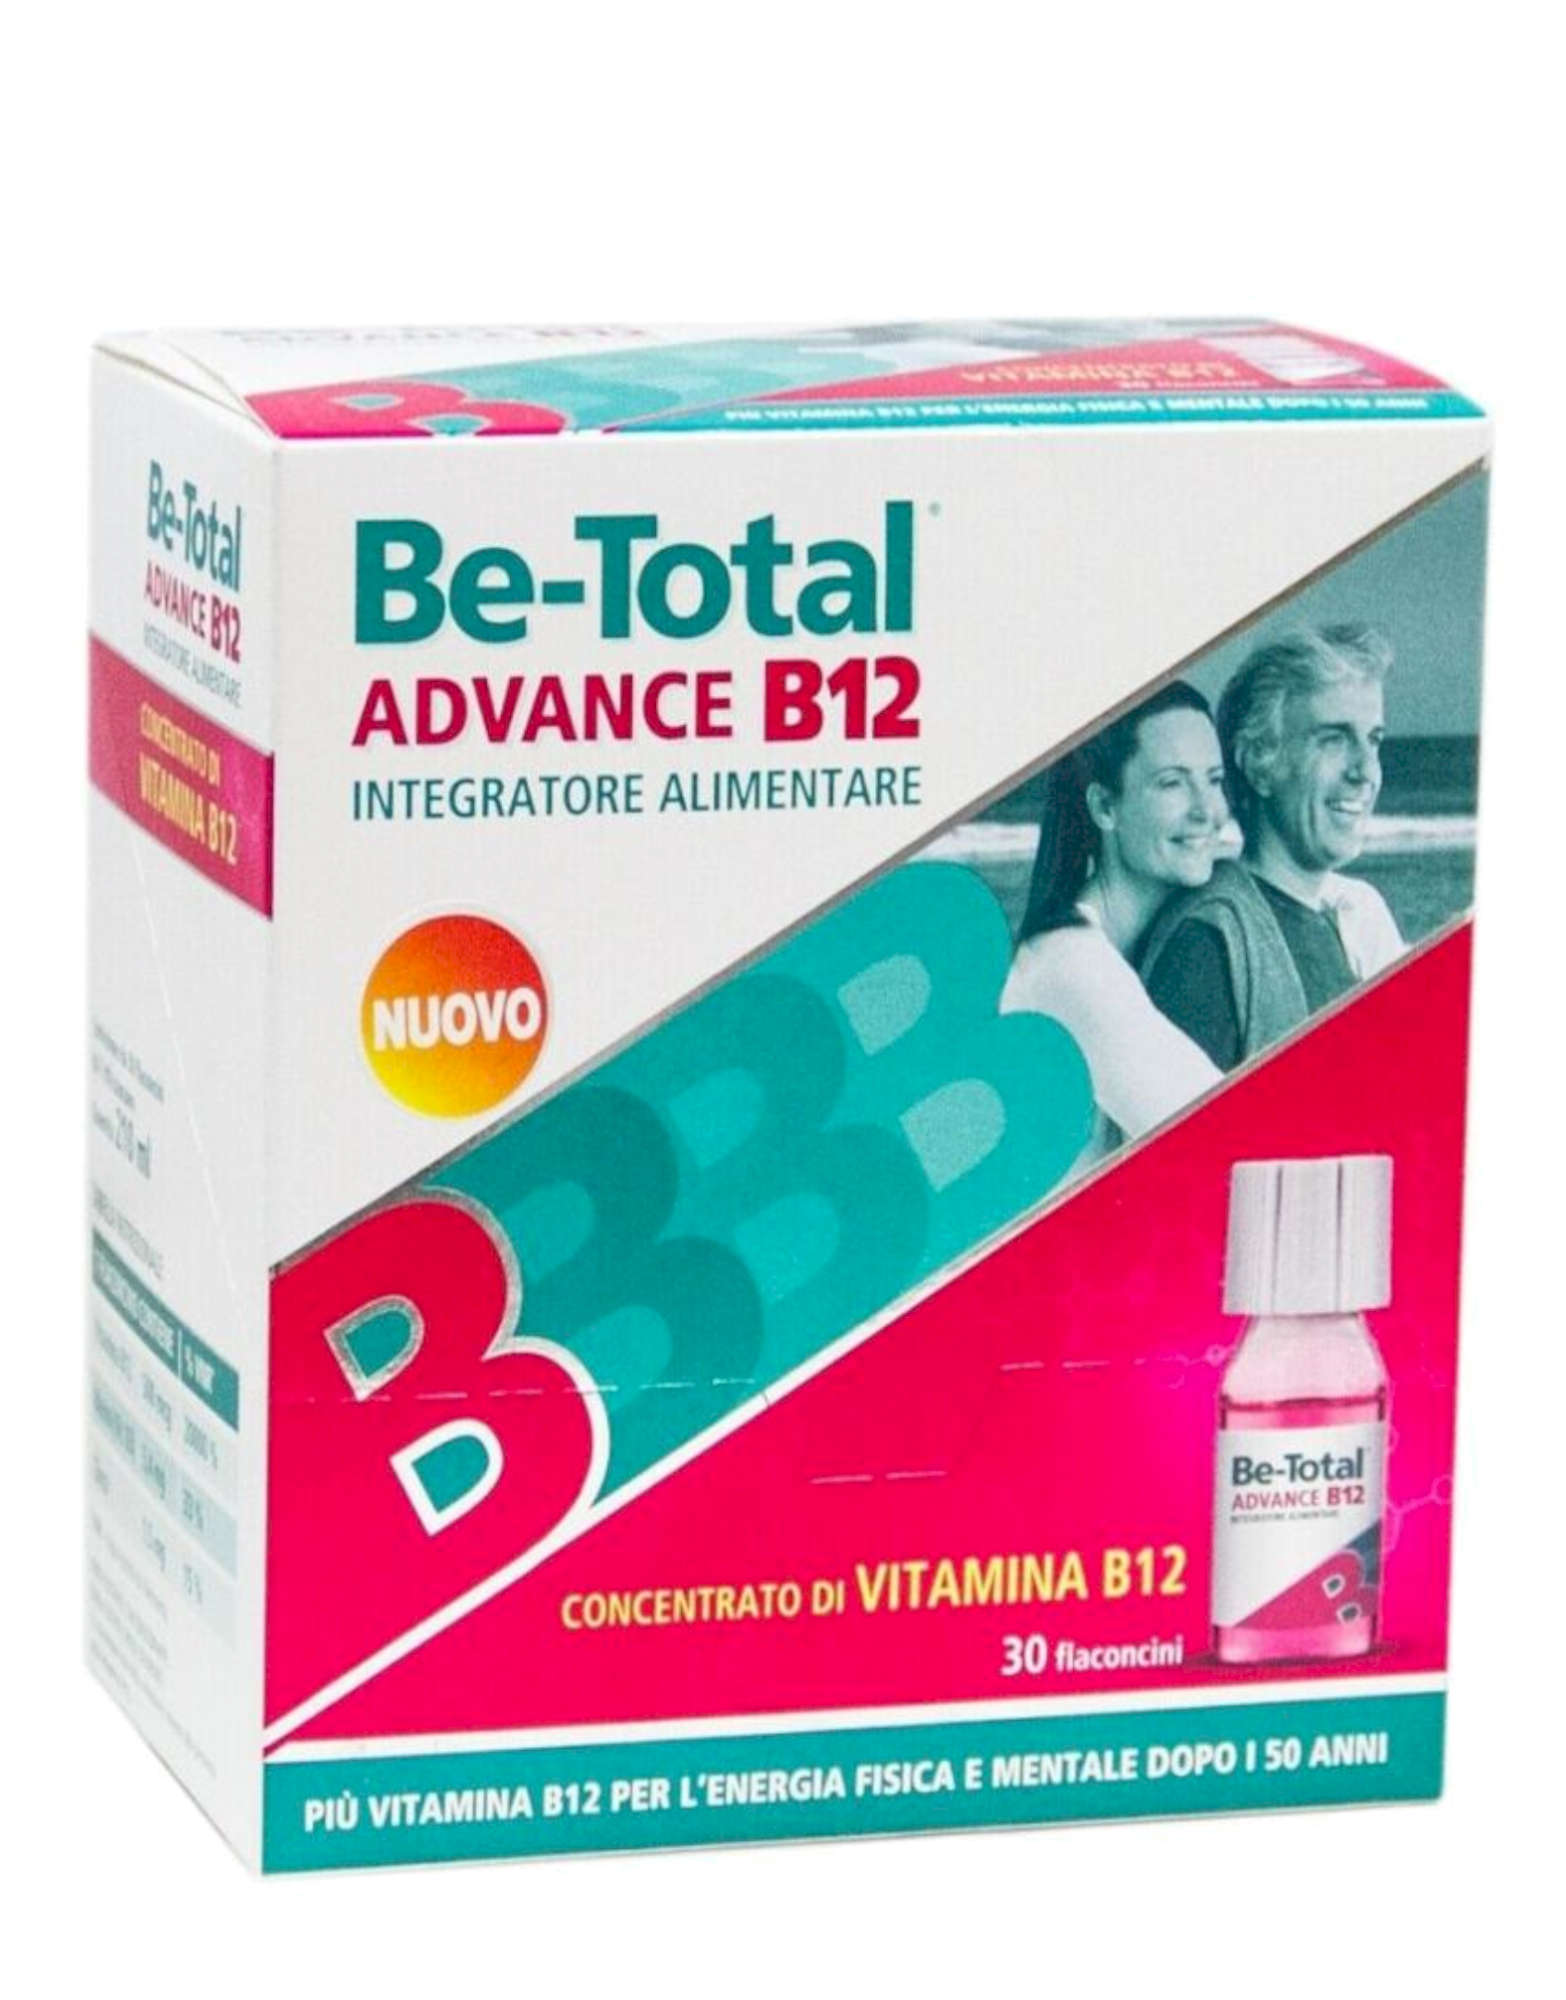 Be-Total Advance B12 by Be-total, 30 vials 